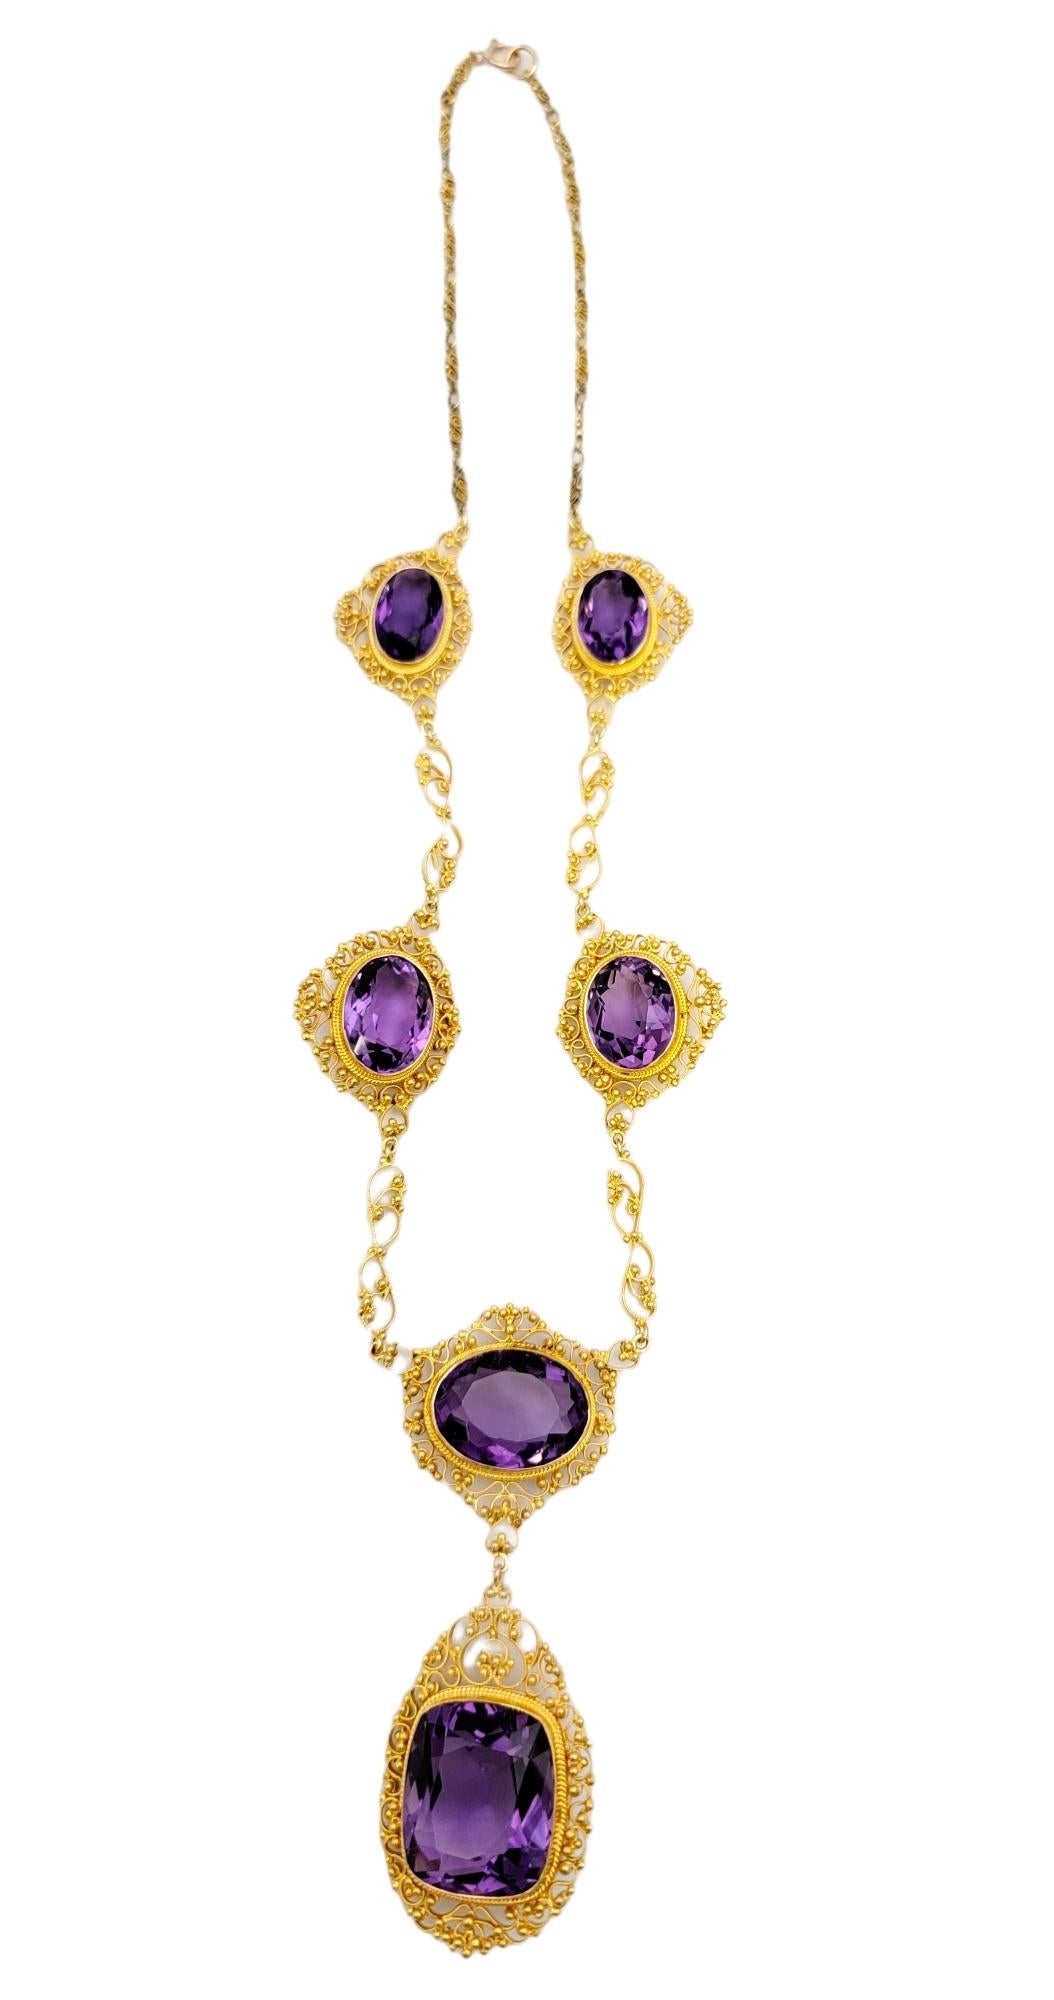 Absolutely stunning amethyst station necklace with an intricately detailed 21 karat yellow gold filigree design. This gorgeous necklace makes a big statement. The beautifully saturated bright purple amethyst stones really pop against the luxurious